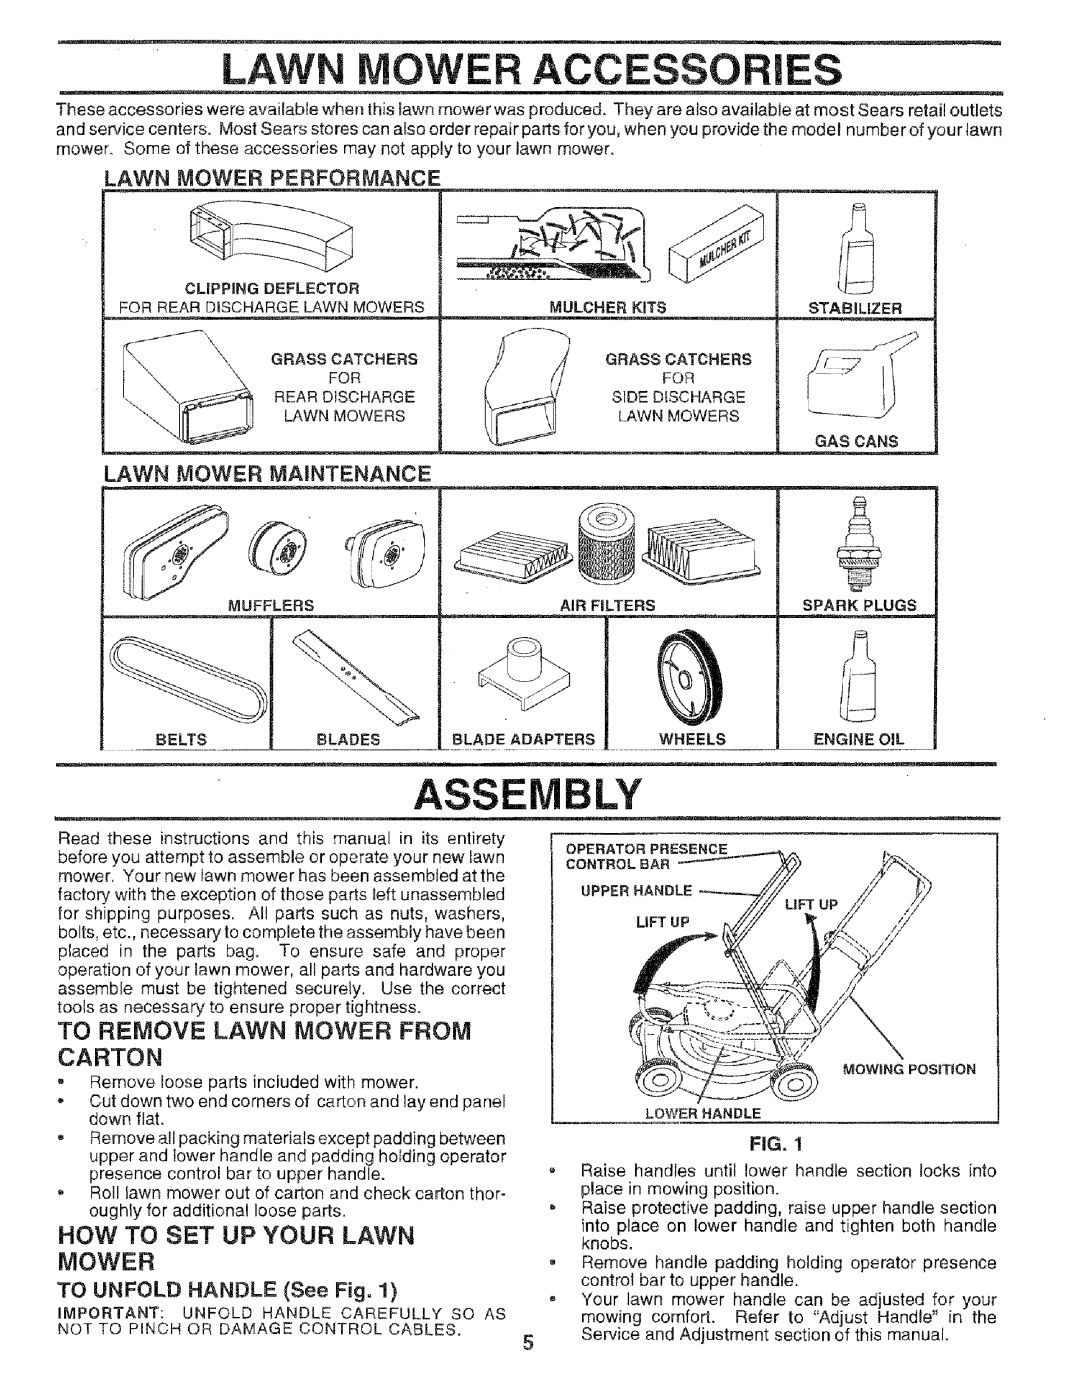 Sears 14.3 Lawnacc, Assembly, To Remove Lawn Mower From Carton, How To Set Up Your Lawn, Lawn Mower Performance, Mufflers 